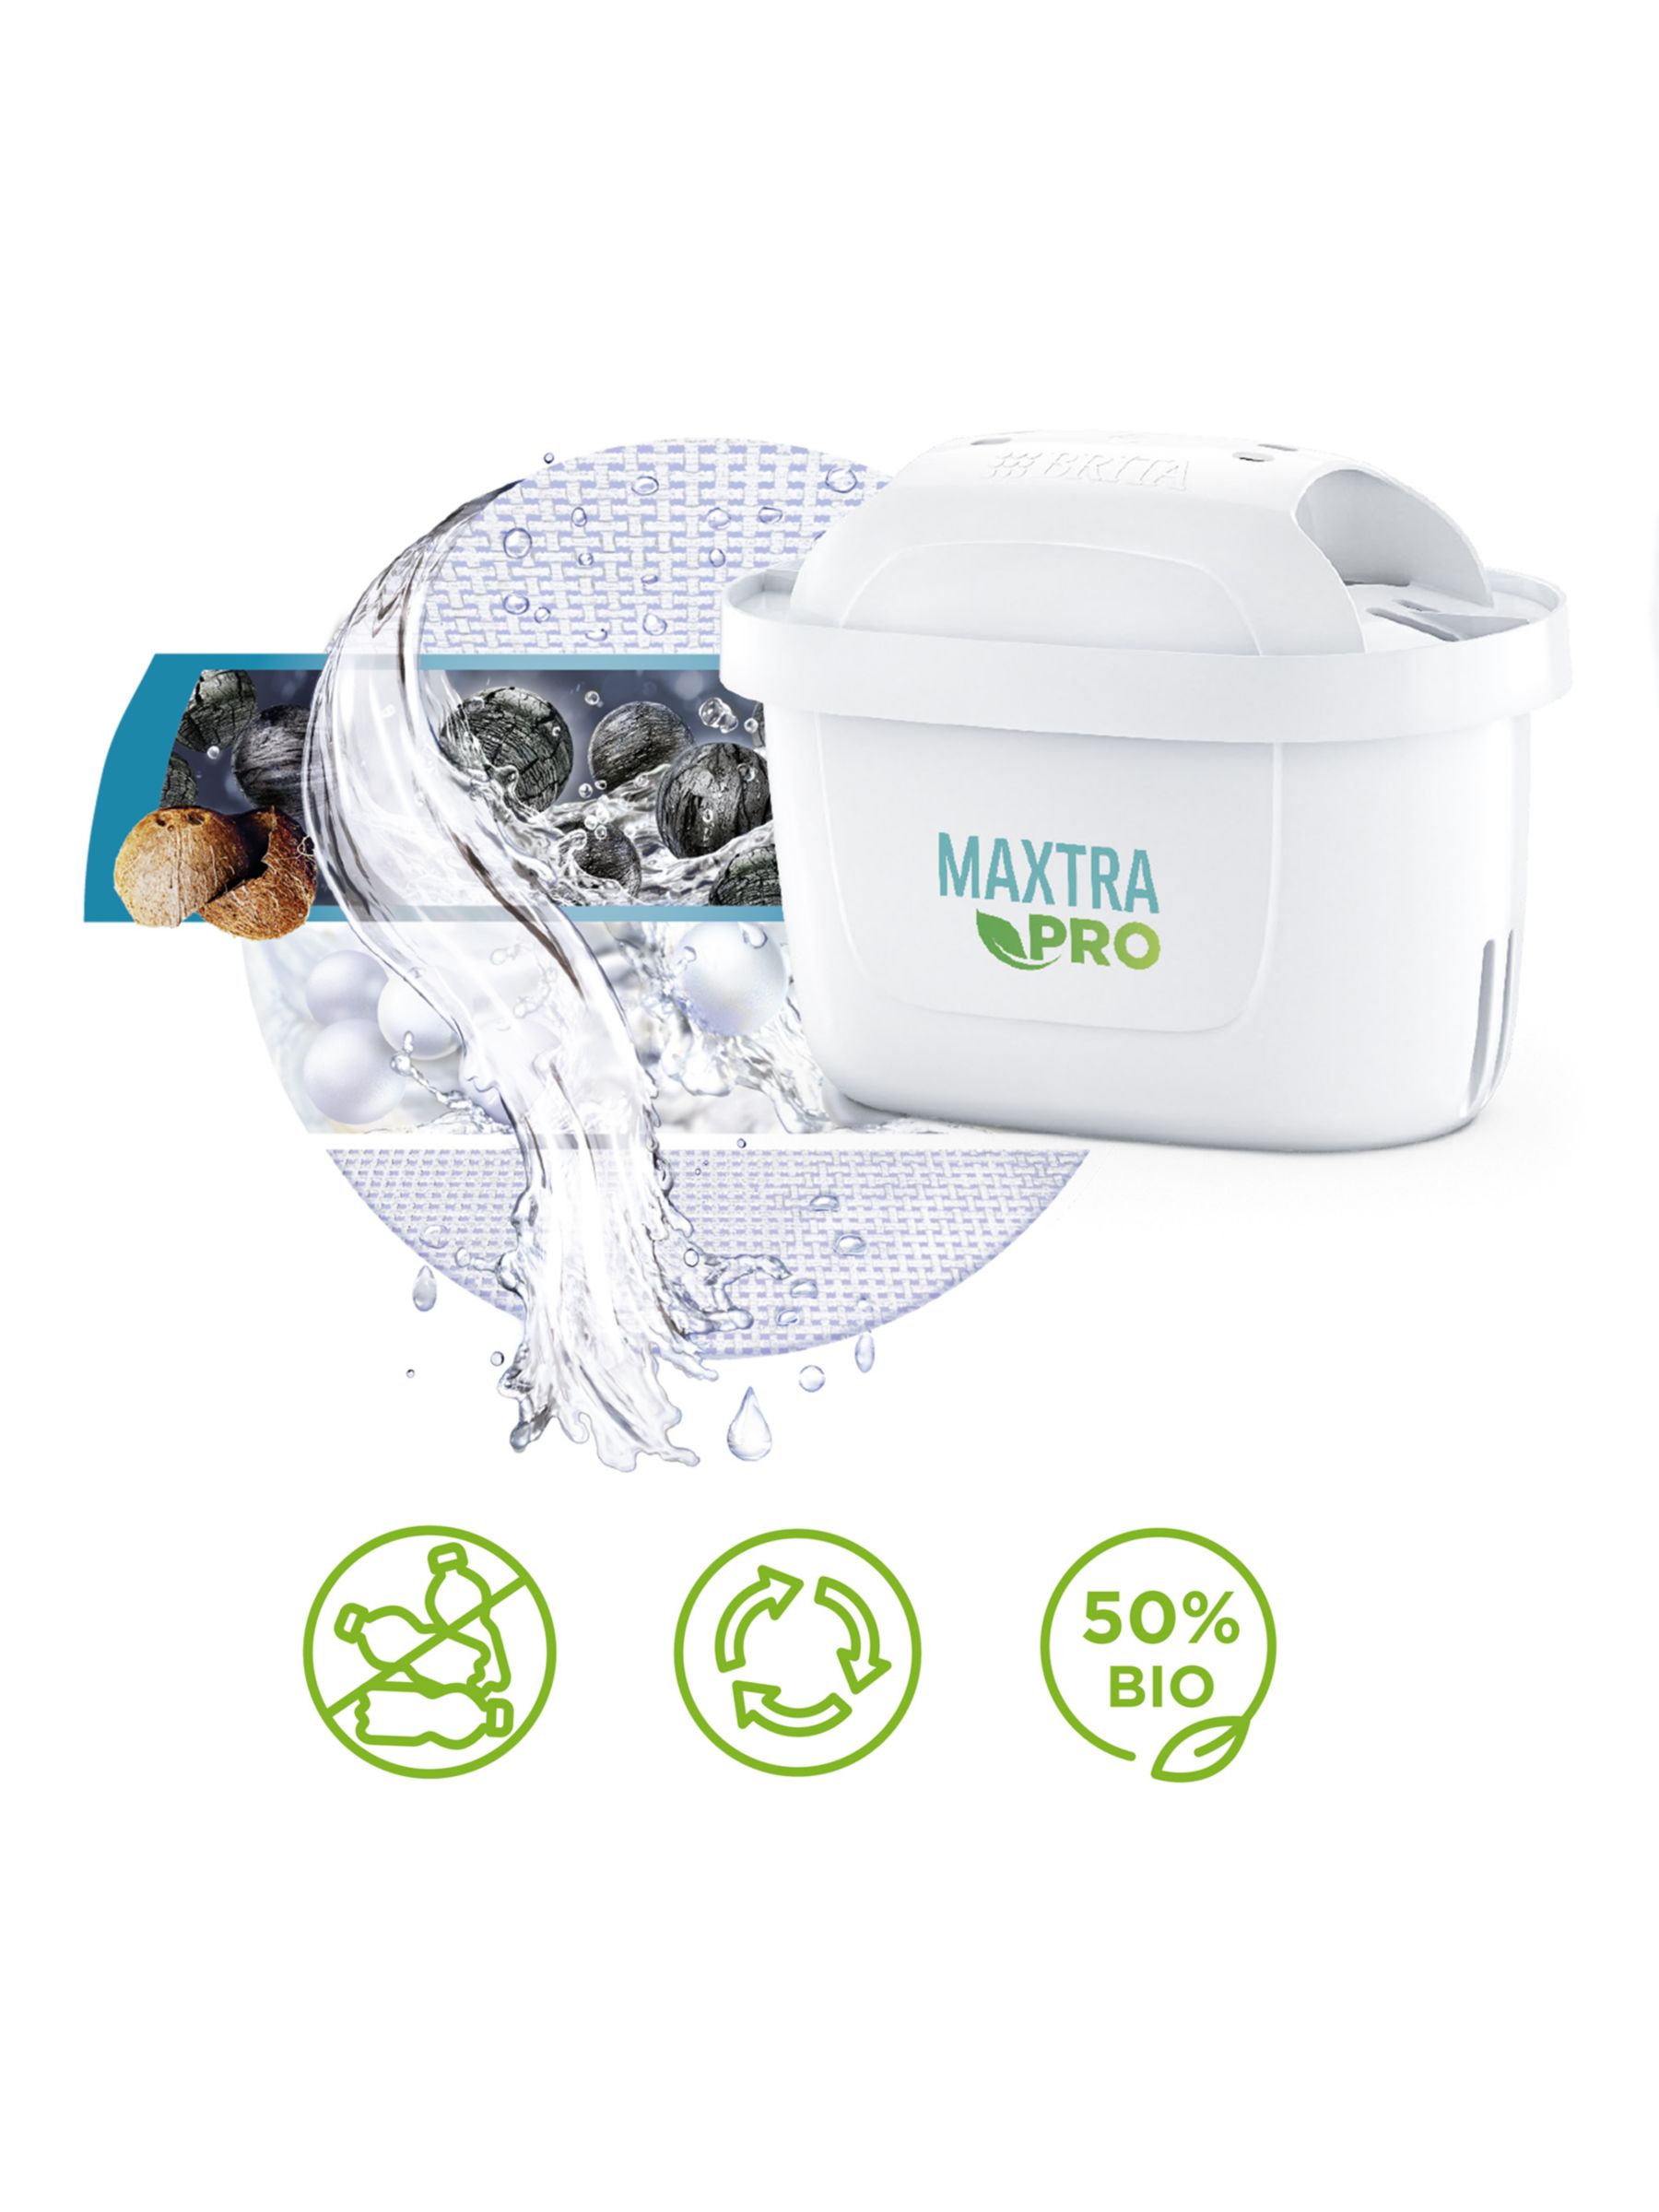 BRITA MAXTRA PRO ALL-IN-1 Waterfilter (6-pack)